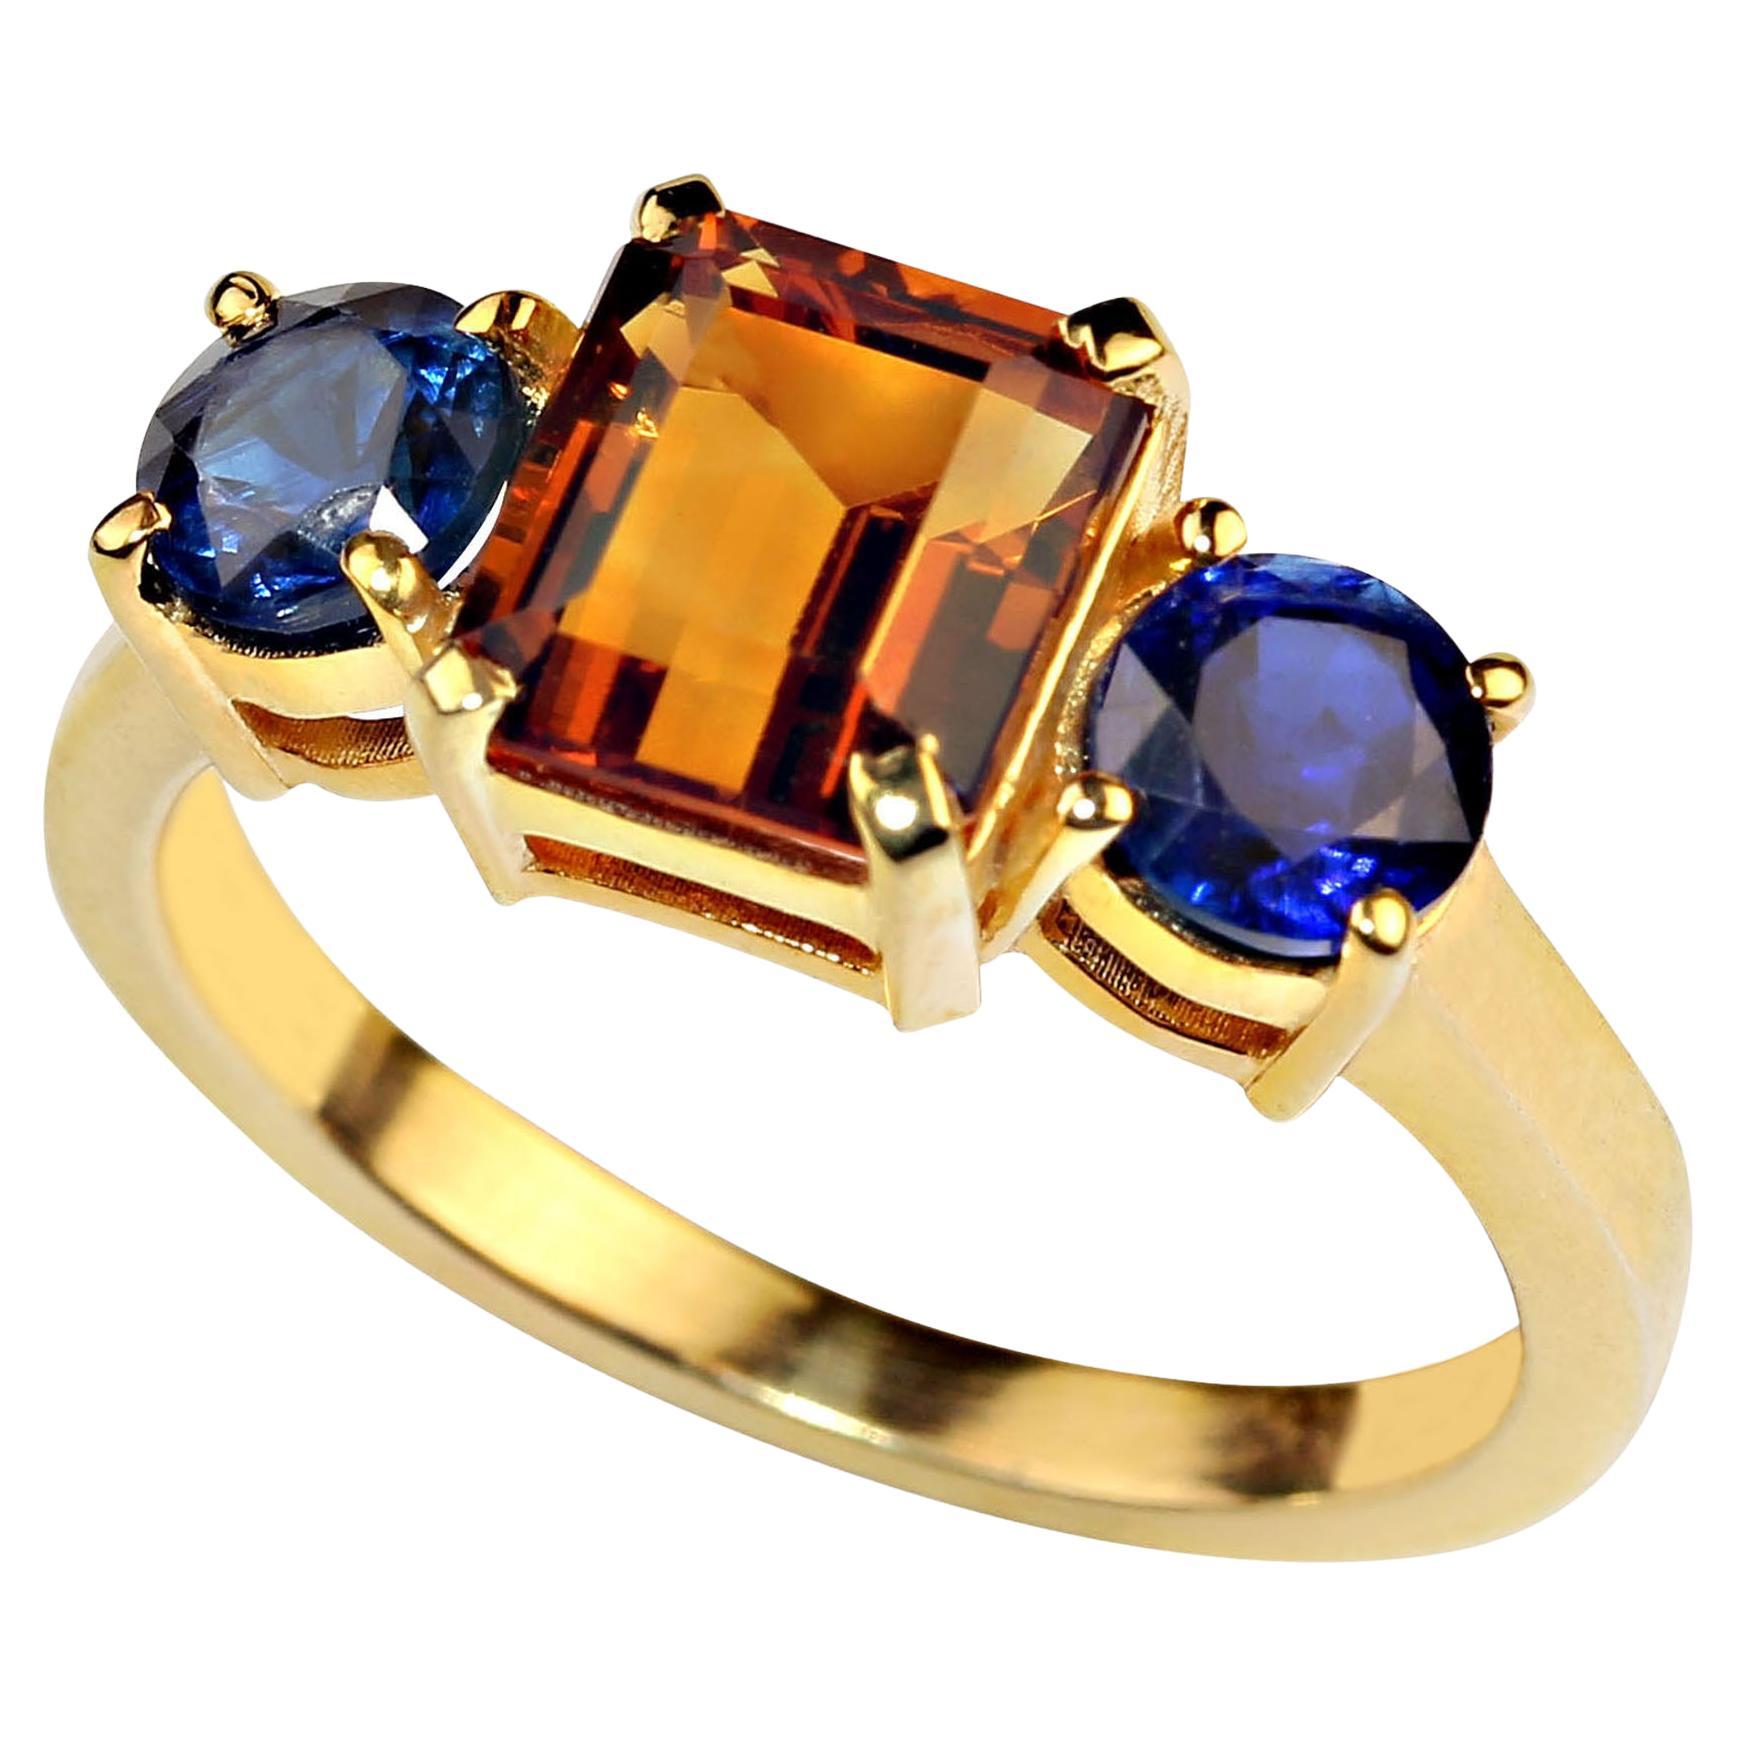 This classic three stone ring is set with an elegant combination of rich Citrine and Kyanite. This emerald cut Citrine weighs 2.05ct. The two blue Kyanite weigh 1.41ctw. In ancient times people carried Citrine as a protection against evil thoughts